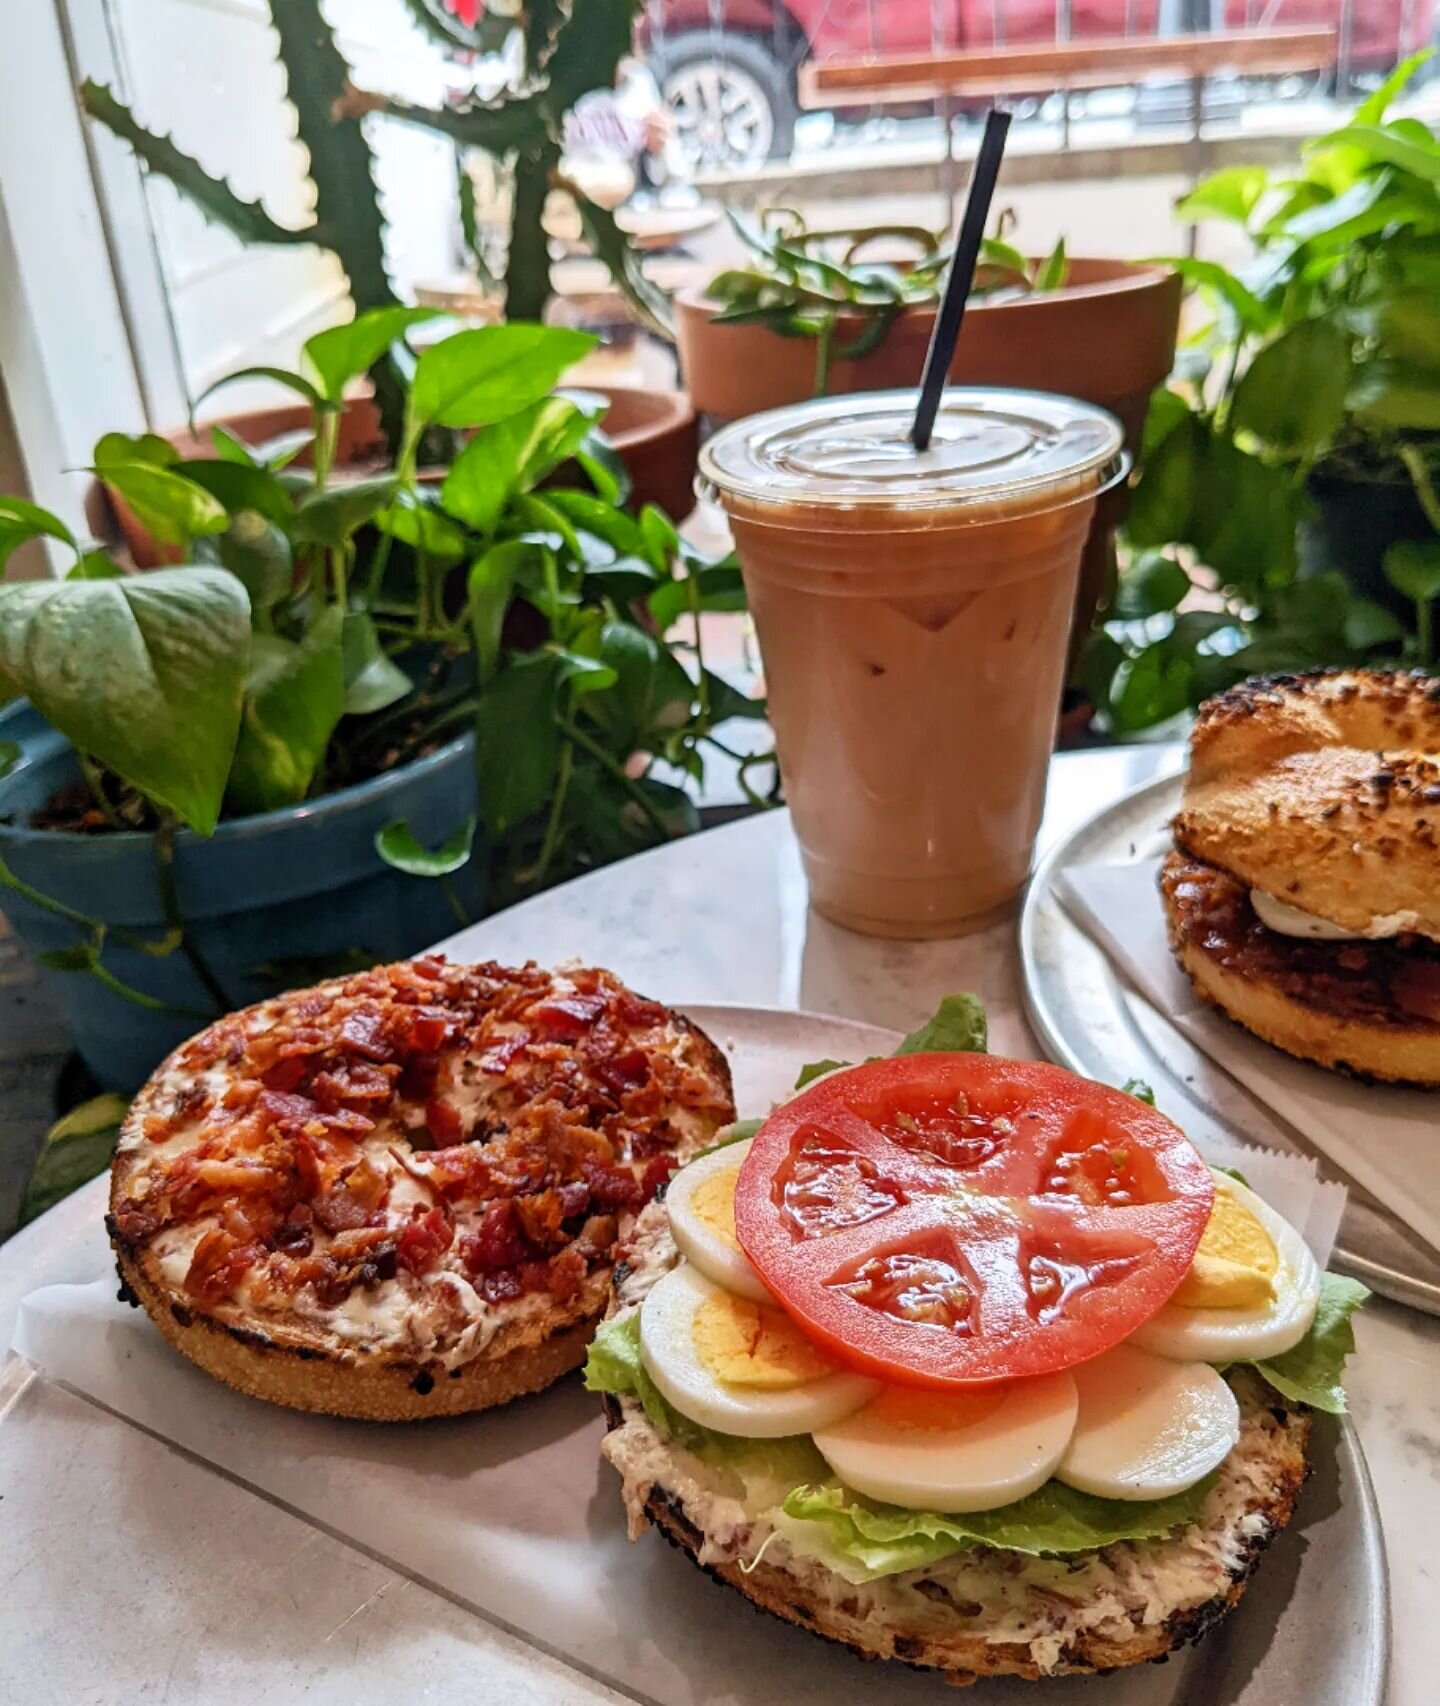 Just because we haven't posted a bagel in a while, here's a simple breakfast BLT with a hardboiled egg and a cold brew 👌
#harvardsquare #bagelshop #handrolledbagels